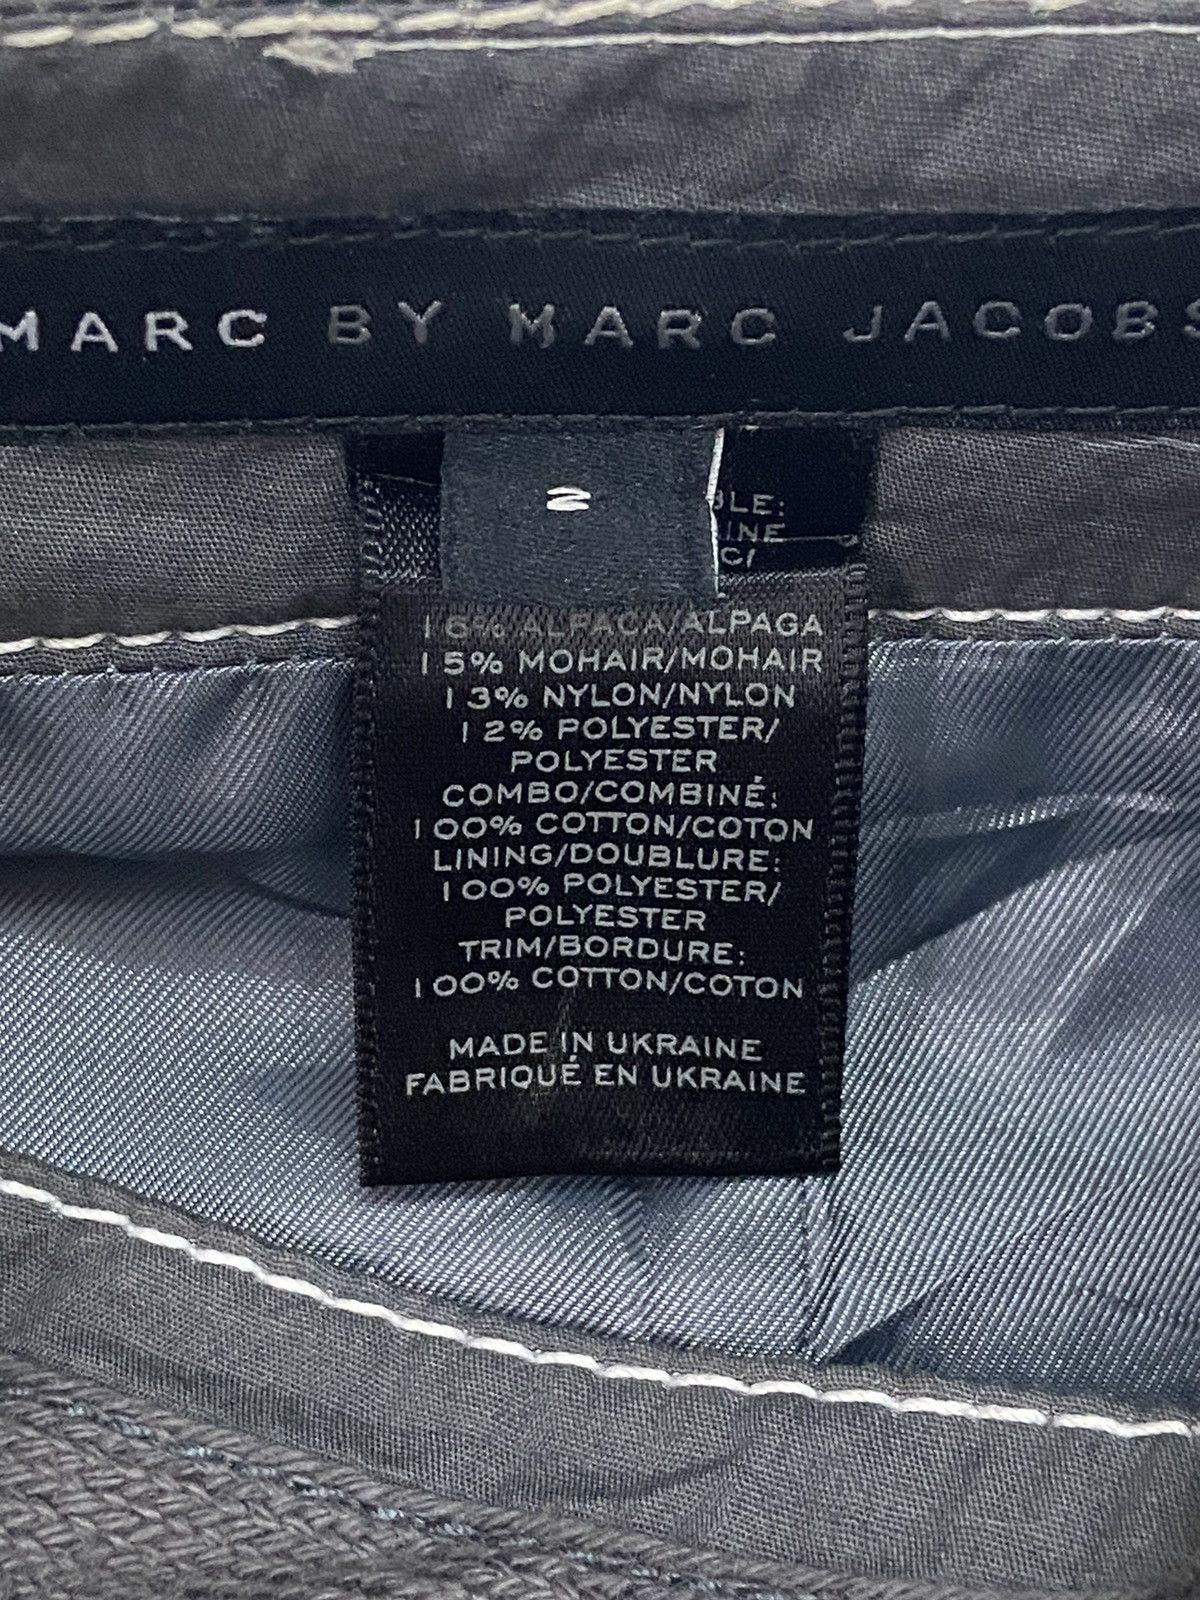 Marc by Marc Jacobs Wool Skirts - 4